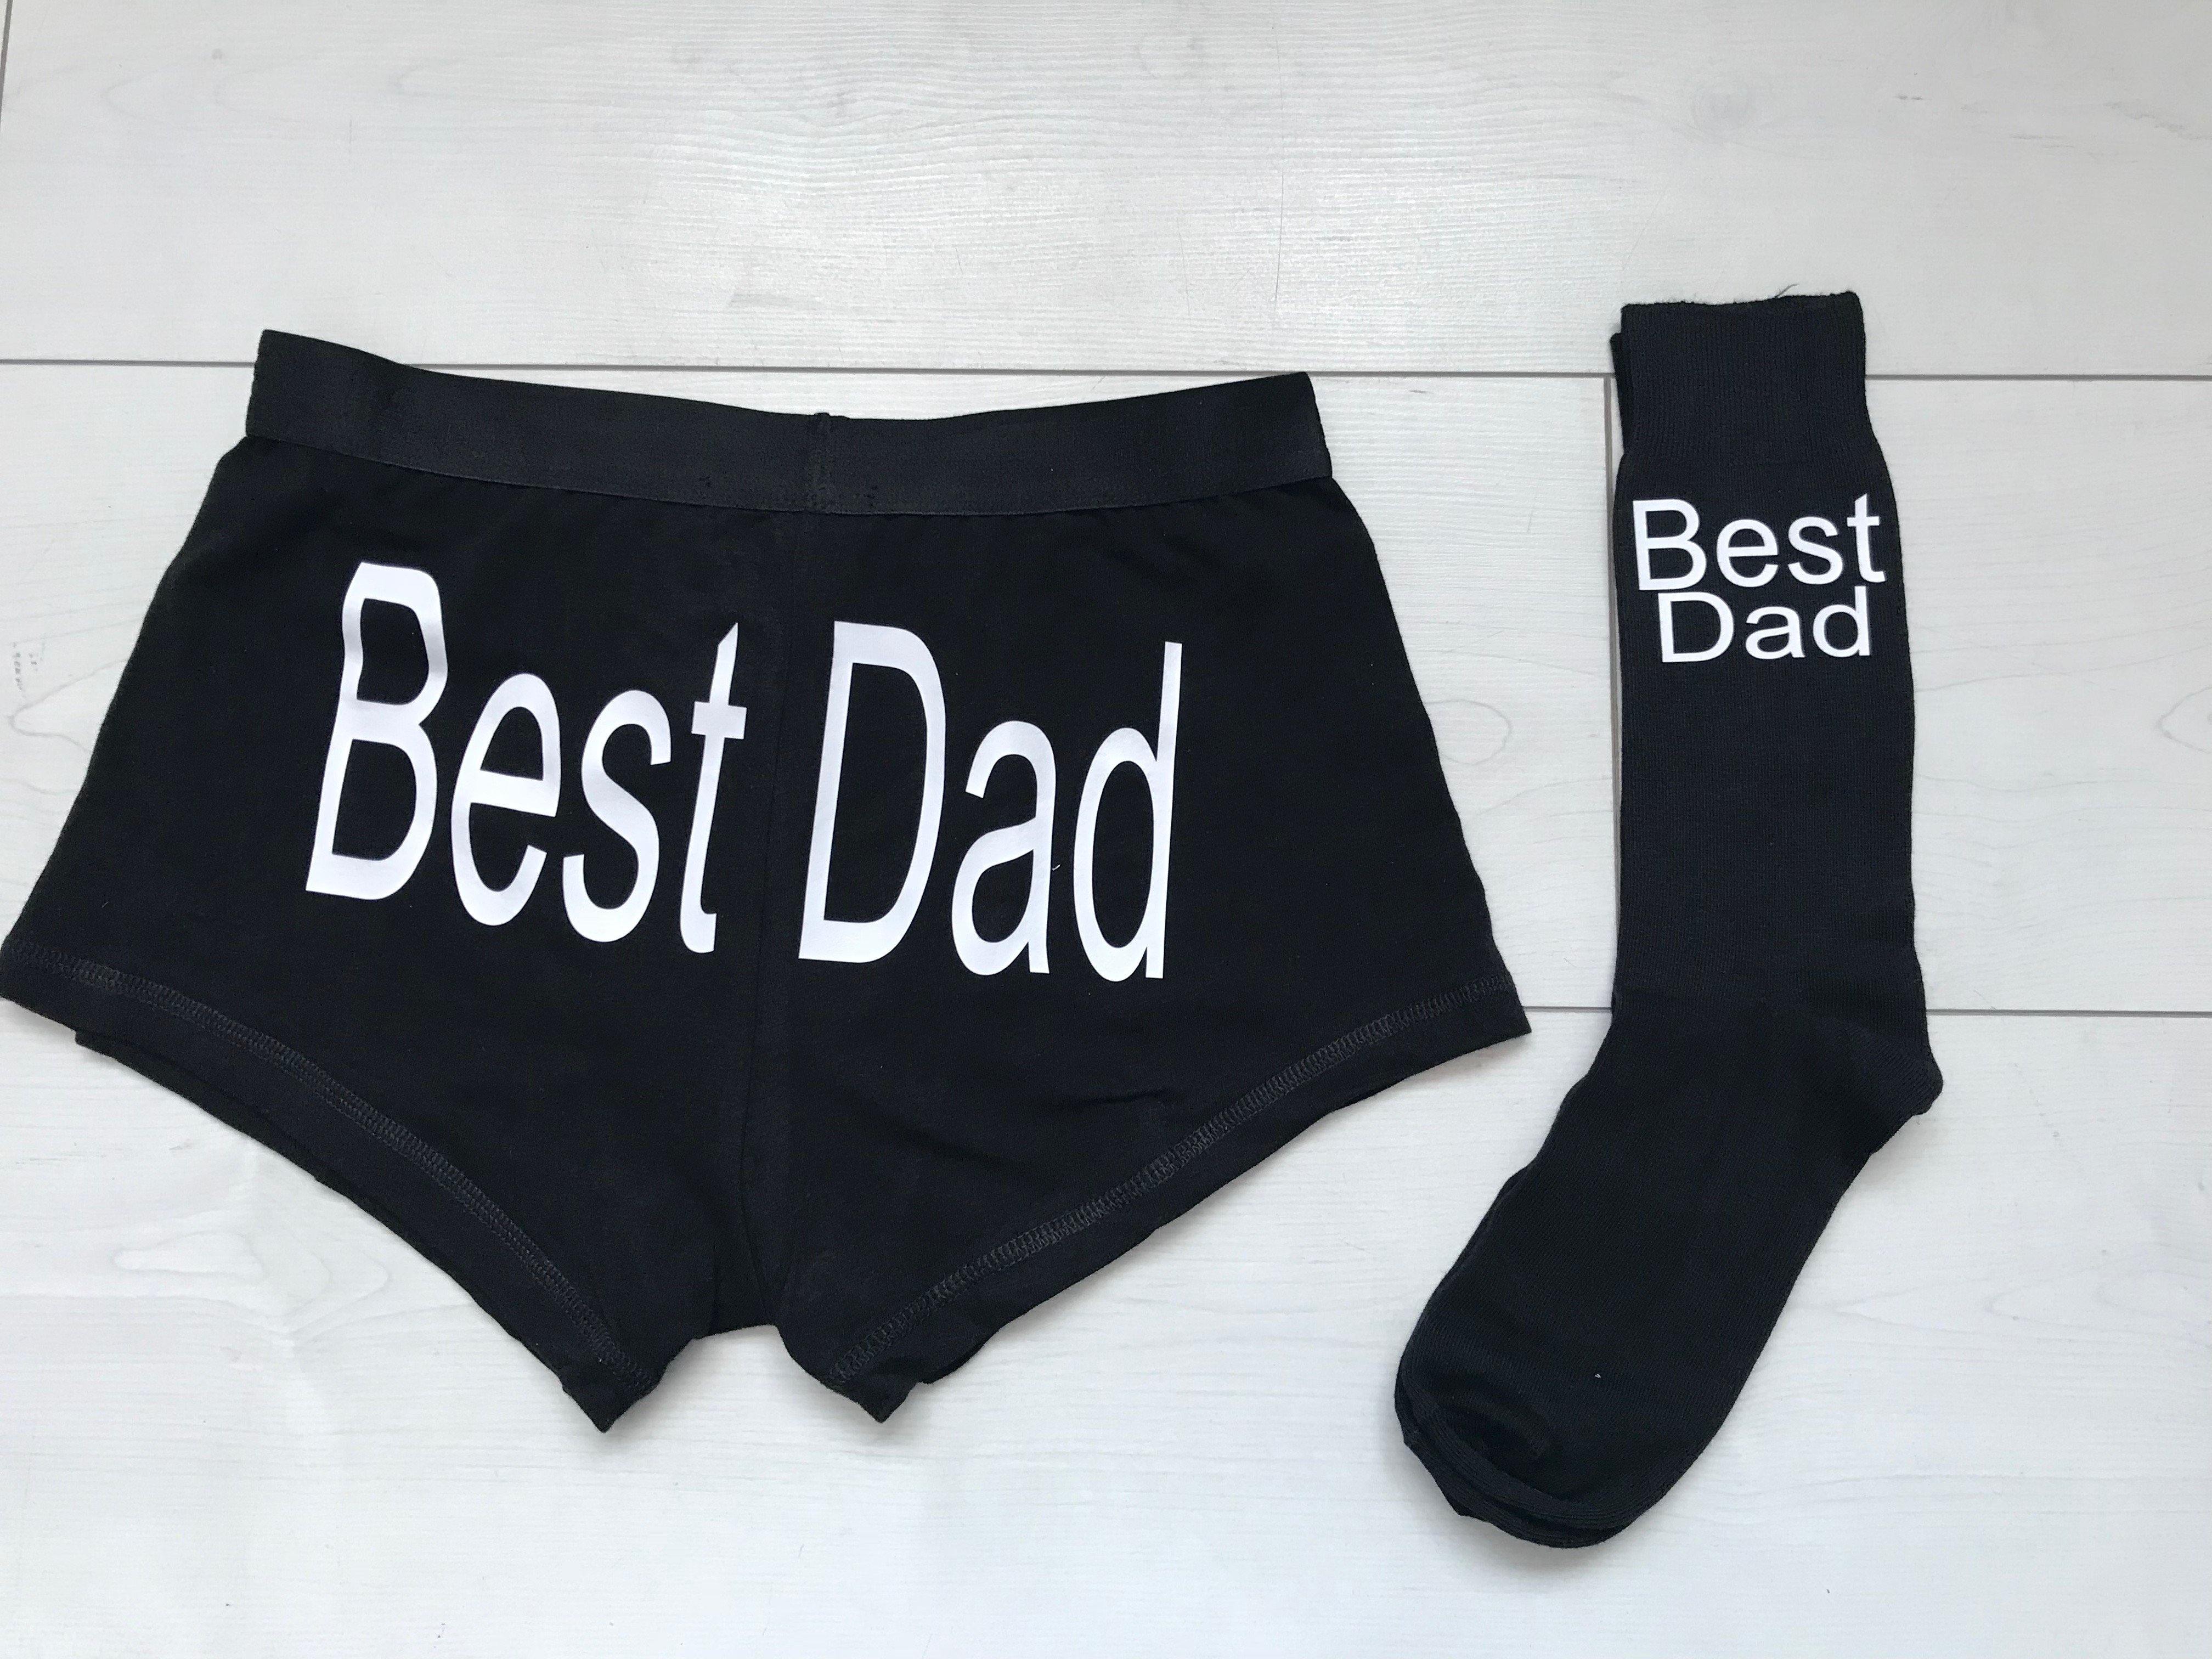 Fathers day Boxers and socks - Robes 4 You